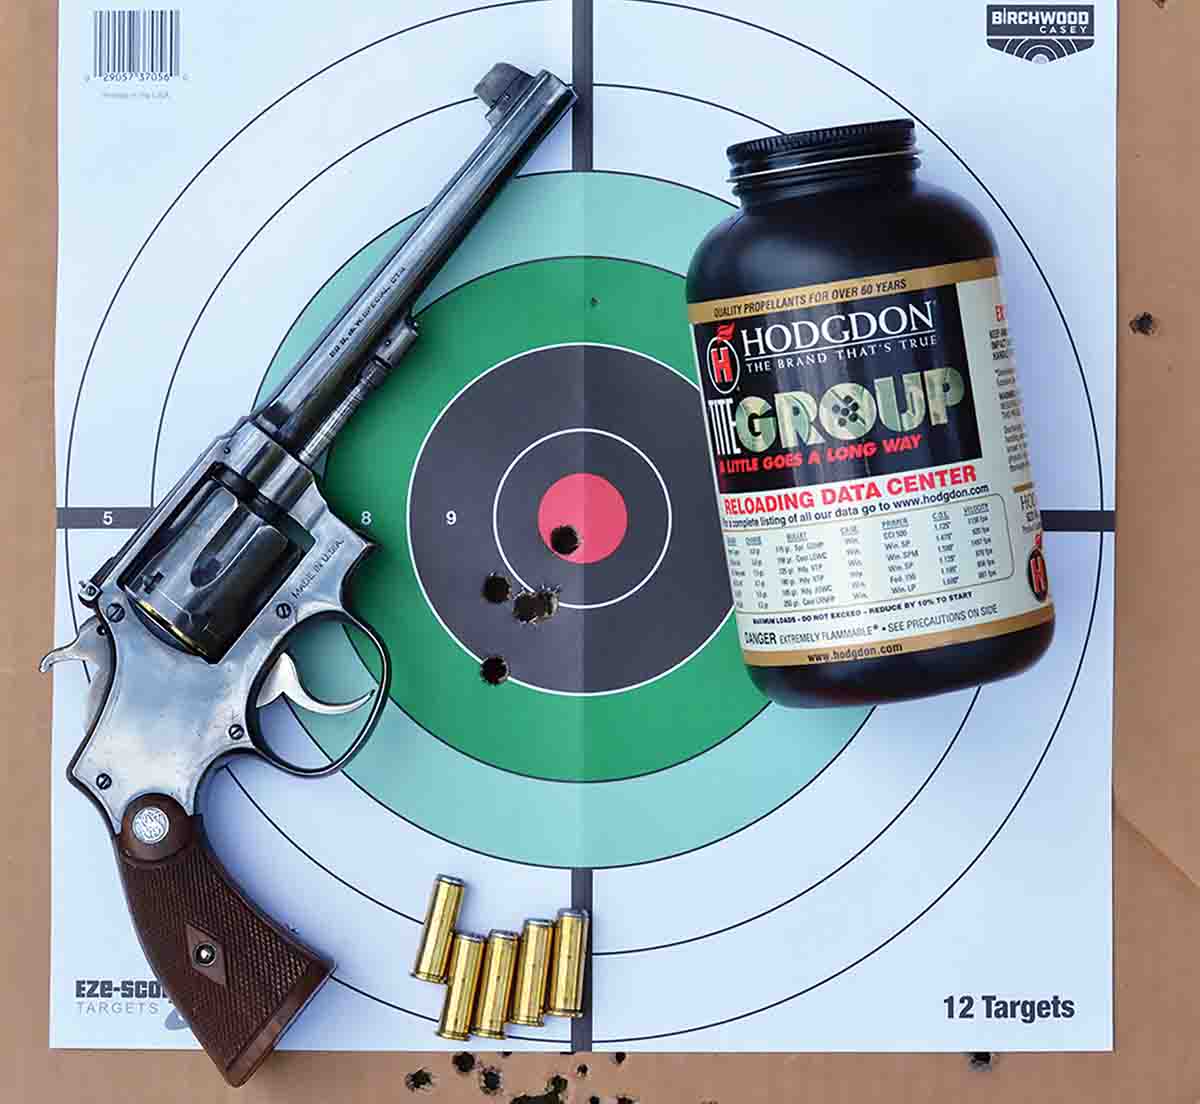 Many handloads produced excellent accuracy in the Smith & Wesson Military & Police Model of 1905 Target Model.